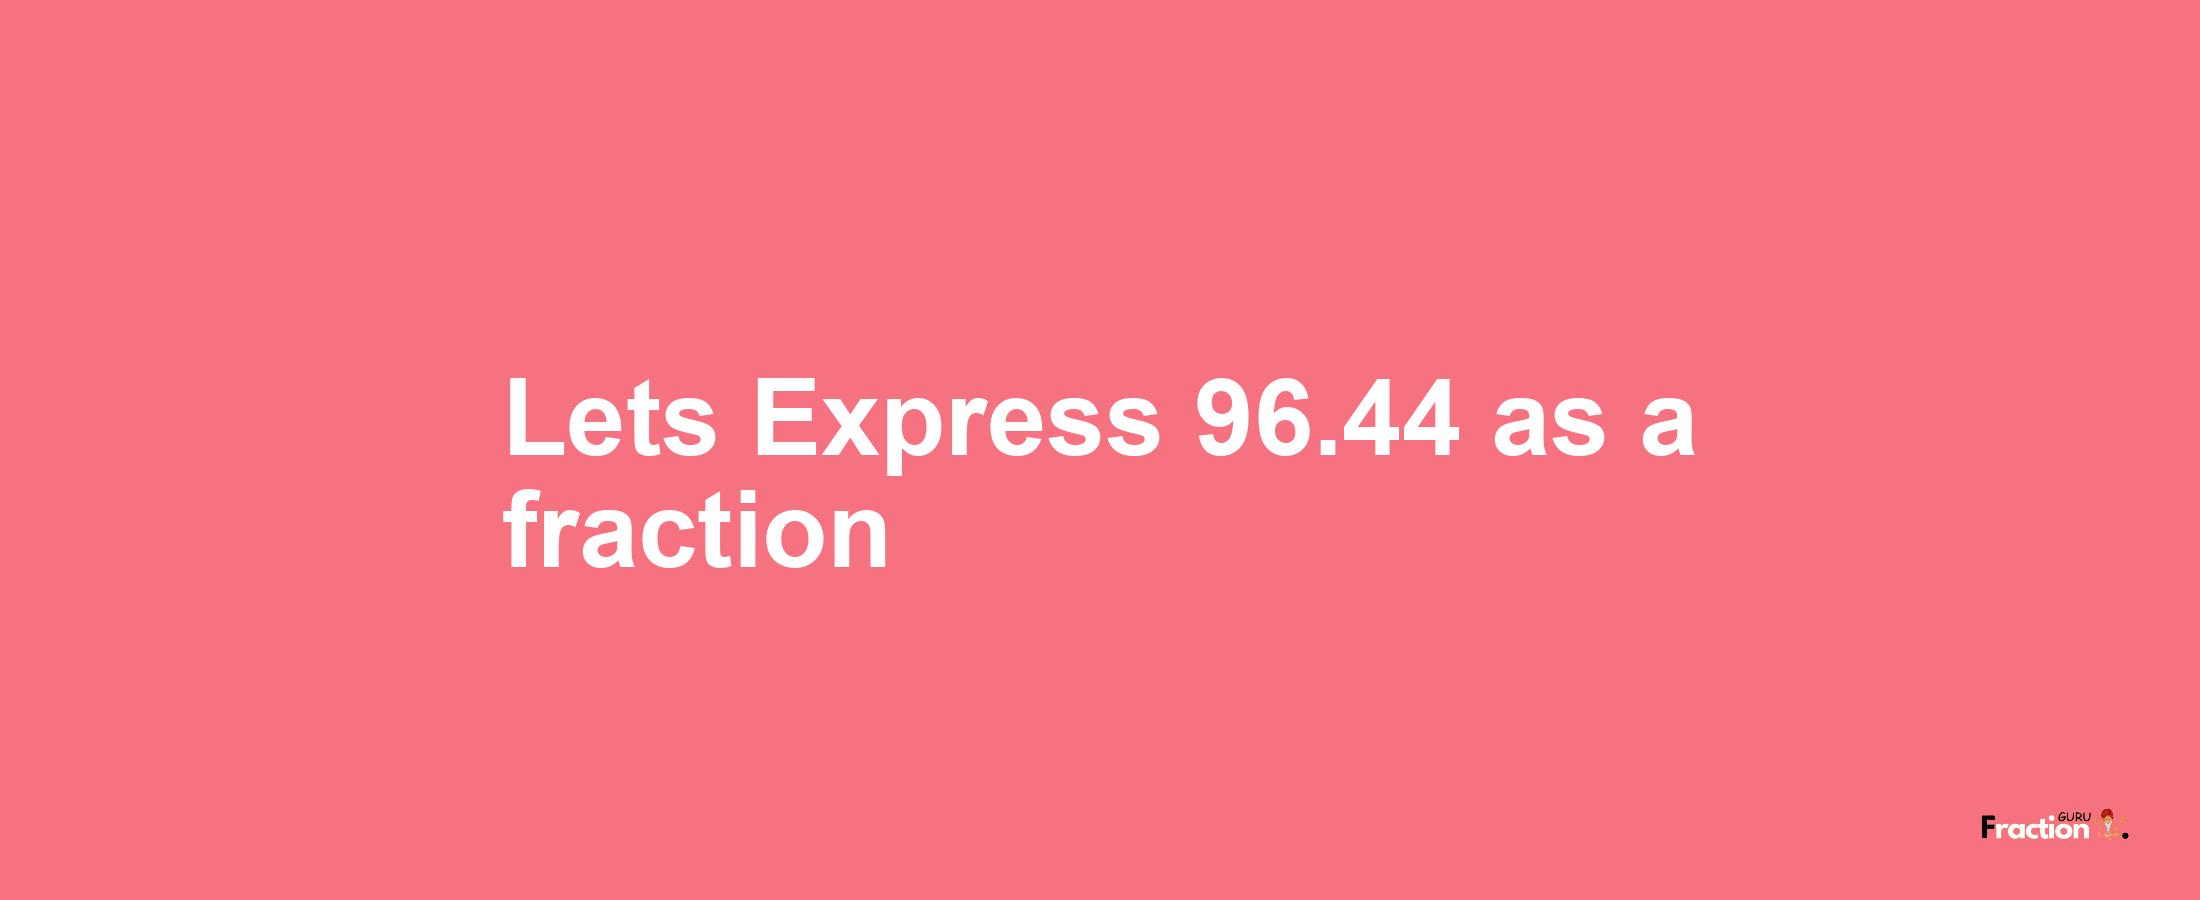 Lets Express 96.44 as afraction